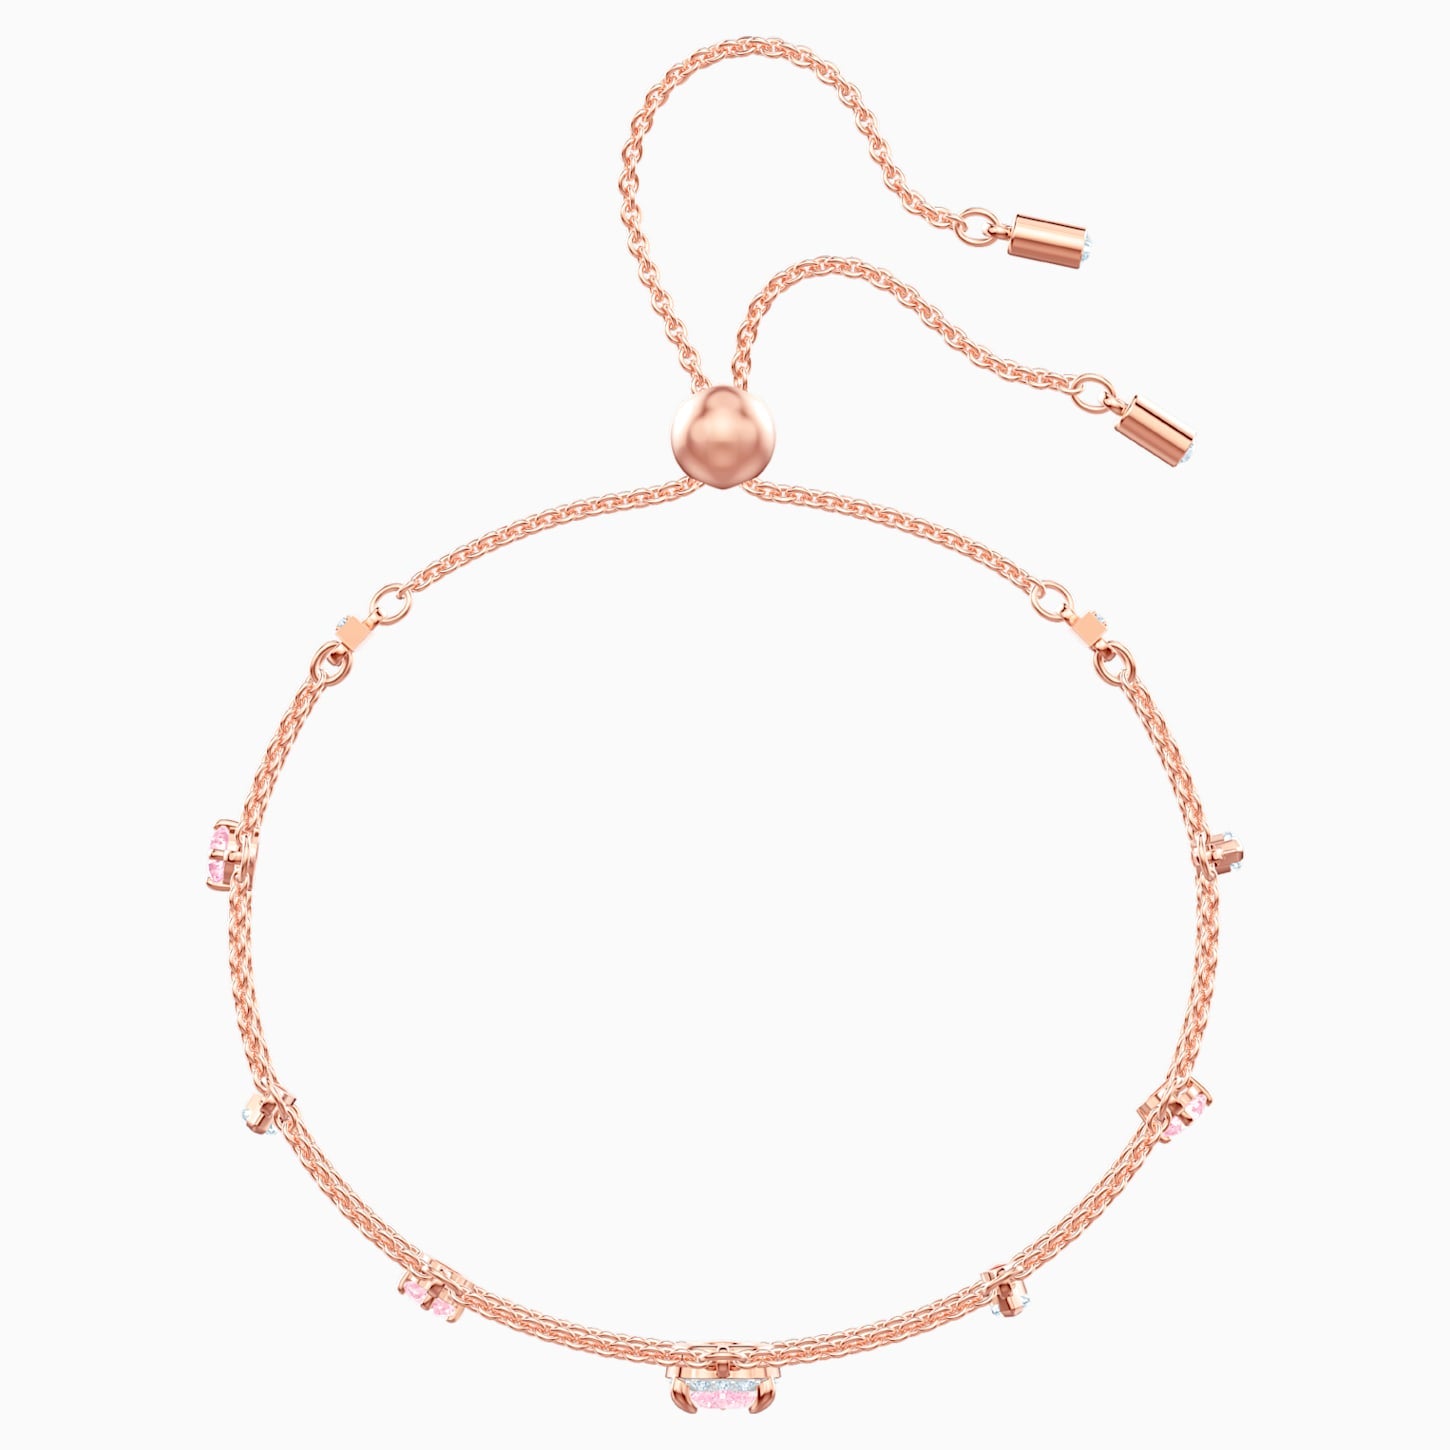 One Bracelet, Multi-colored, Rose-gold tone plated – Marie's